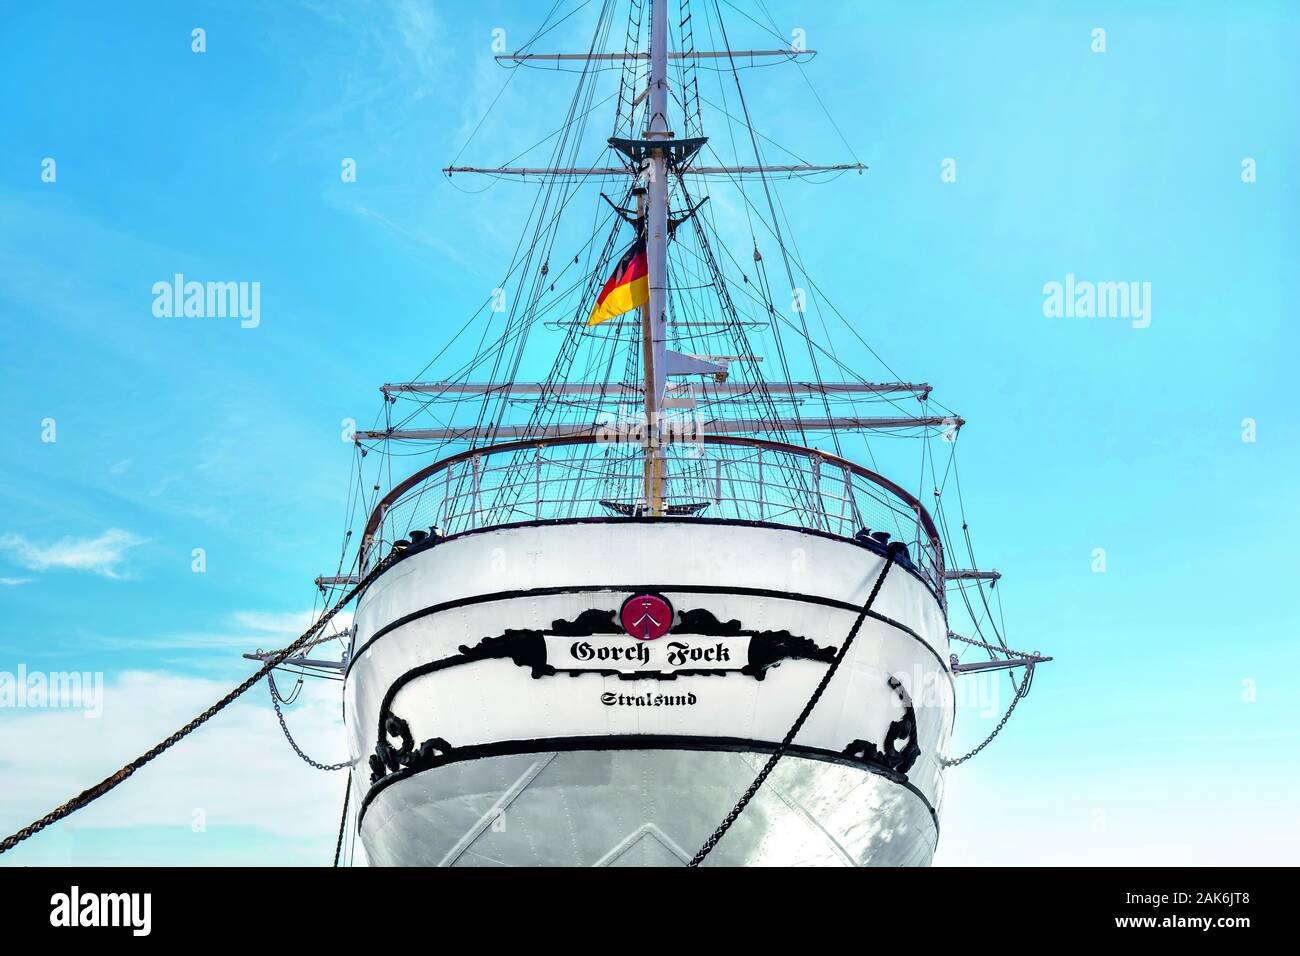 Page 2 - Segelschulschiff High Resolution Stock Photography and Images -  Alamy